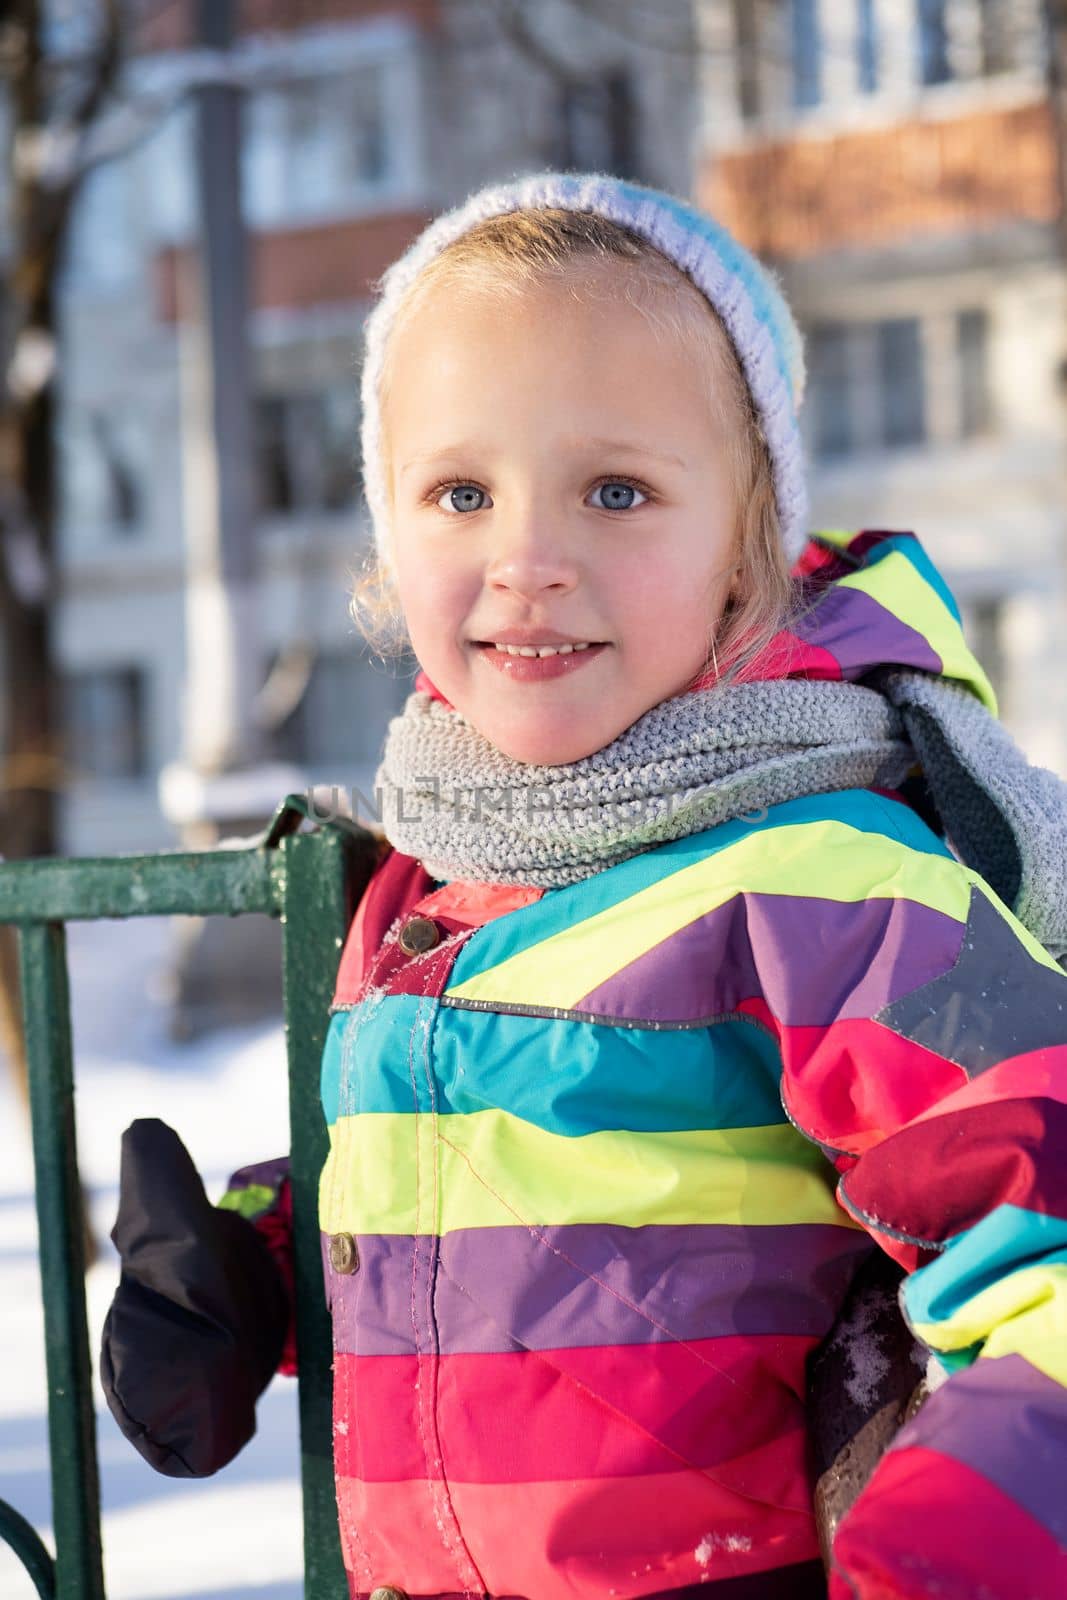 Smiling girl on playground in winter by gcm